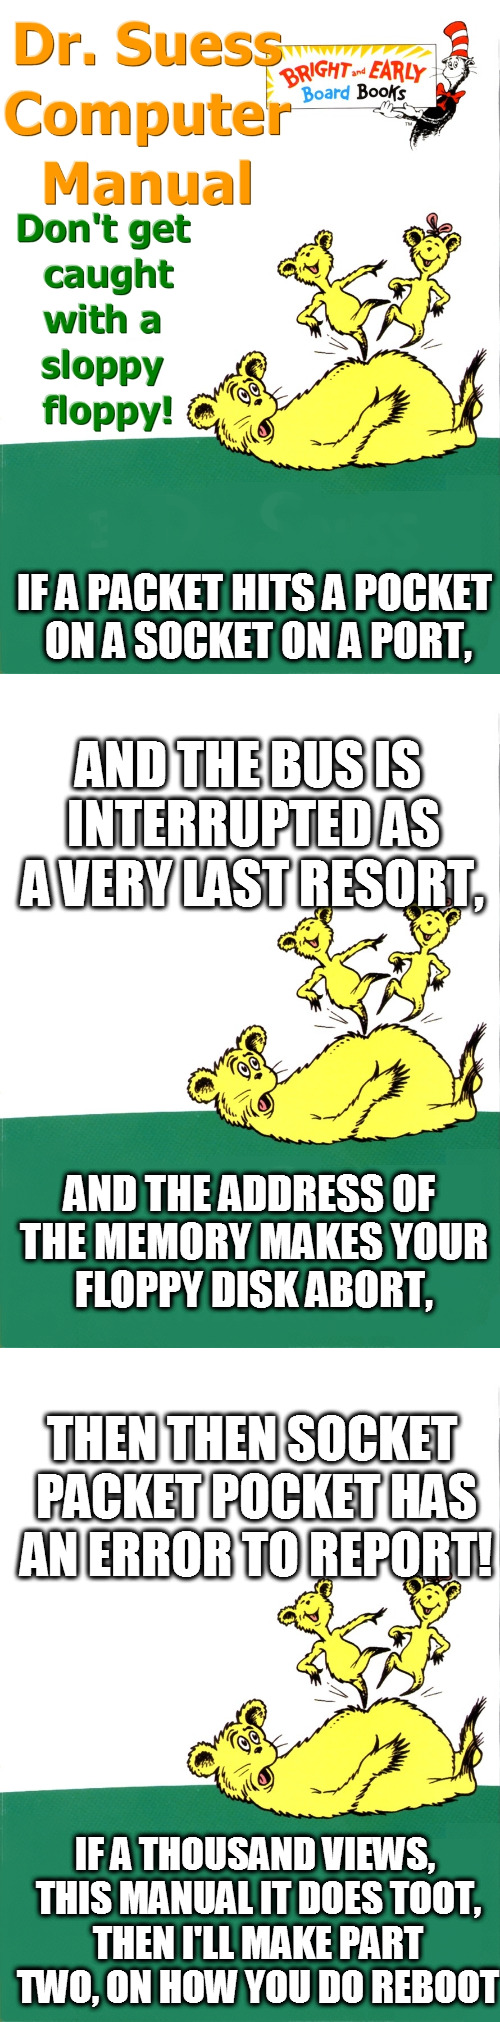 What if Dr. Suess wrote a computer manual? | IF A PACKET HITS A POCKET ON A SOCKET ON A PORT, AND THE BUS IS INTERRUPTED AS A VERY LAST RESORT, AND THE ADDRESS OF THE MEMORY MAKES YOUR FLOPPY DISK ABORT, THEN
THEN SOCKET PACKET POCKET HAS AN ERROR TO REPORT! IF A THOUSAND VIEWS, THIS MANUAL IT DOES TOOT, THEN I'LL MAKE PART TWO, ON HOW YOU DO REBOOT | image tagged in dr suess,funny,computer,grandma finds the internet | made w/ Imgflip meme maker